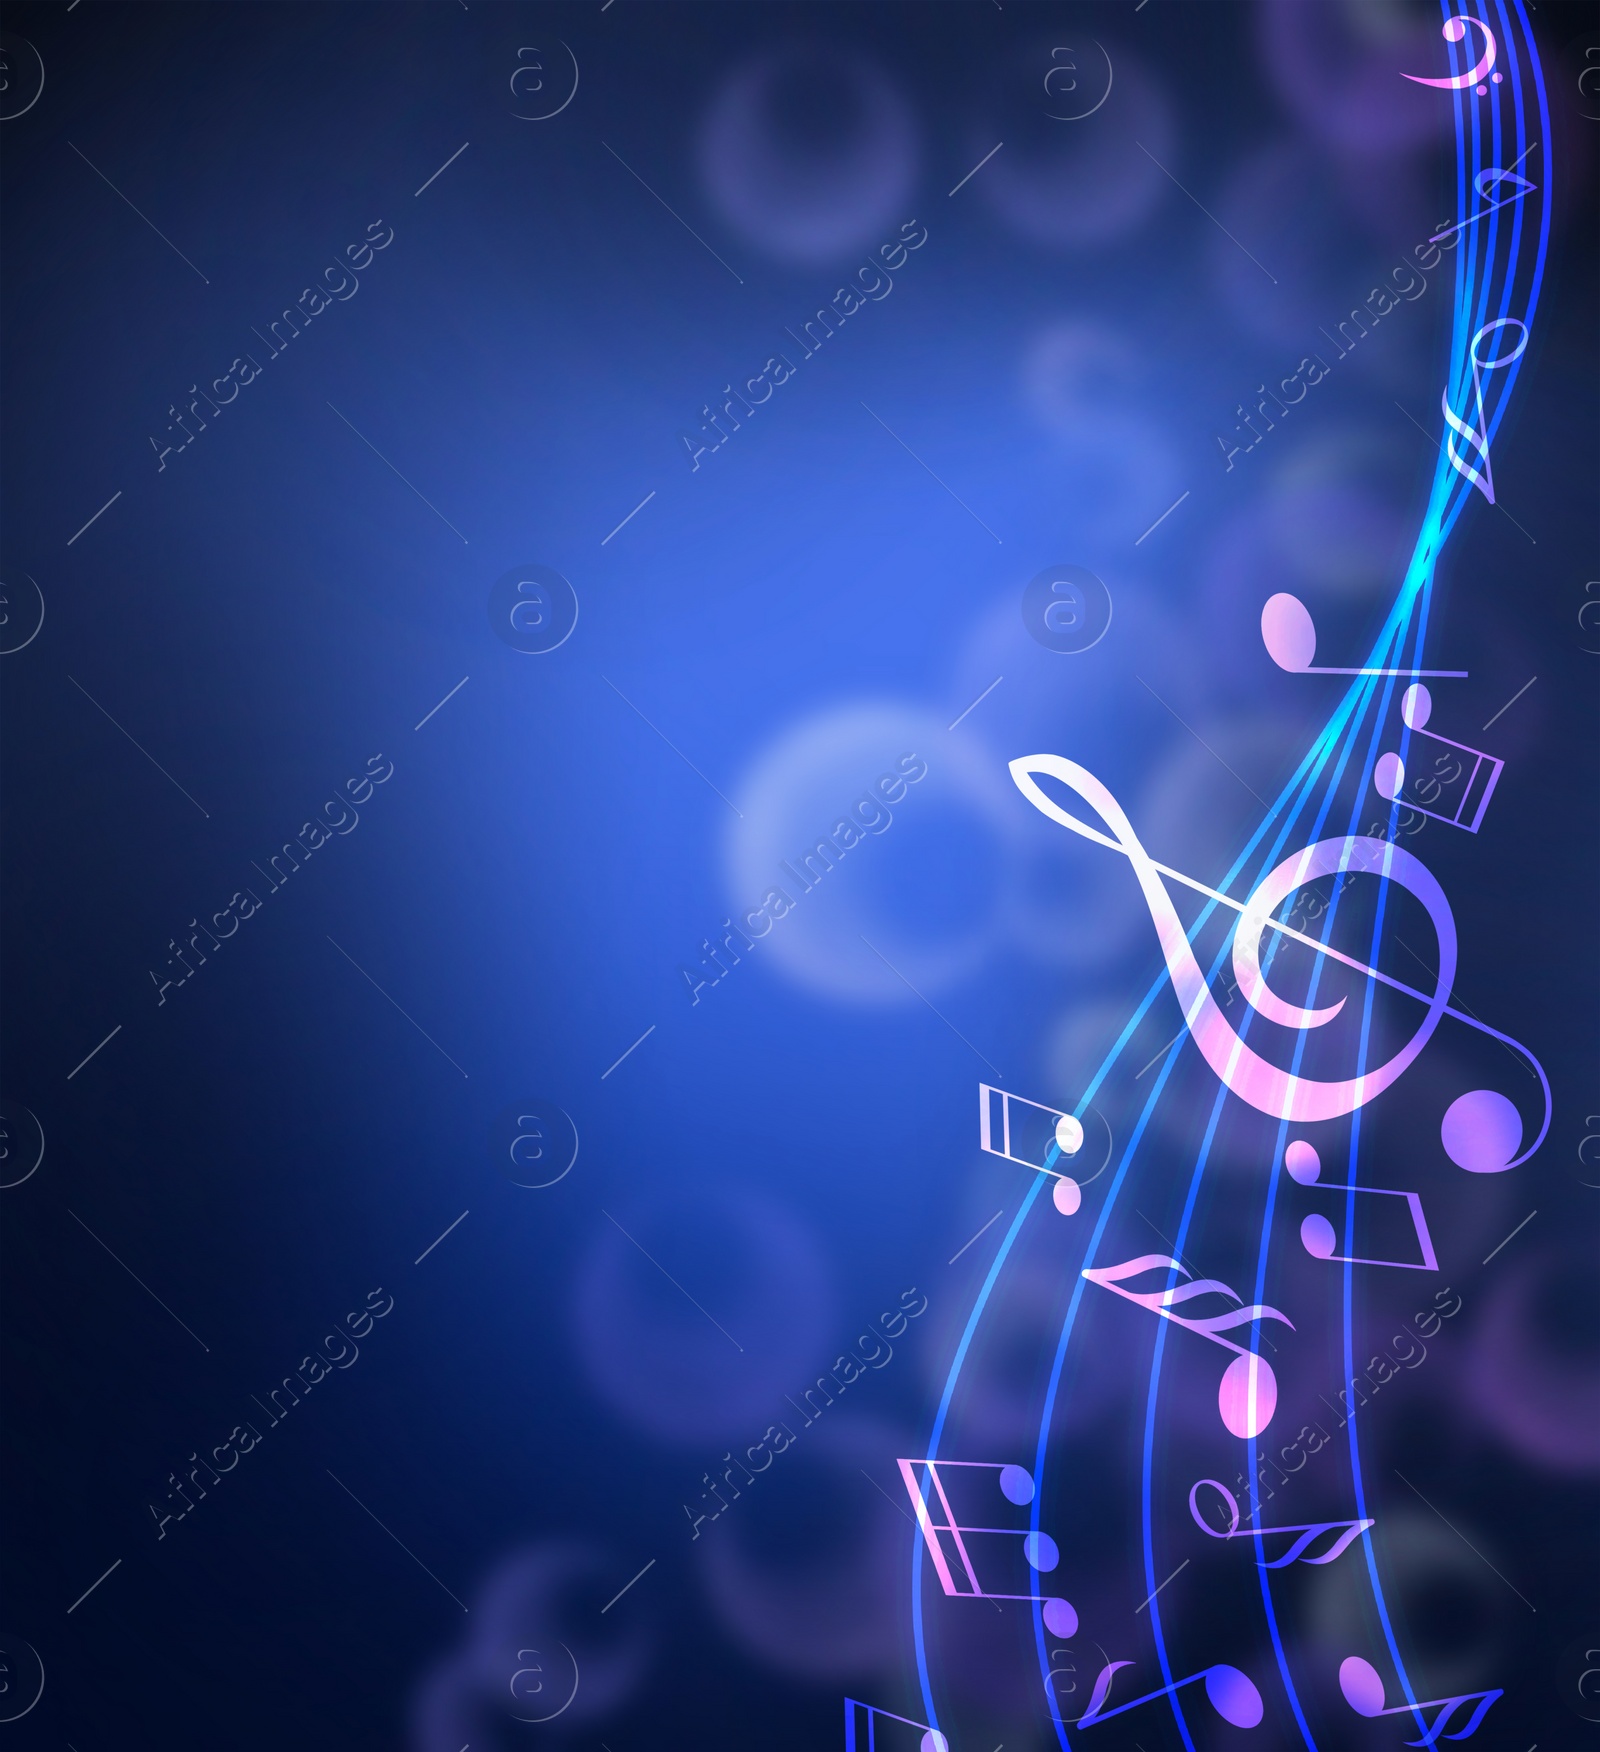 Illustration of Staff with music notes and other musical symbols on color background